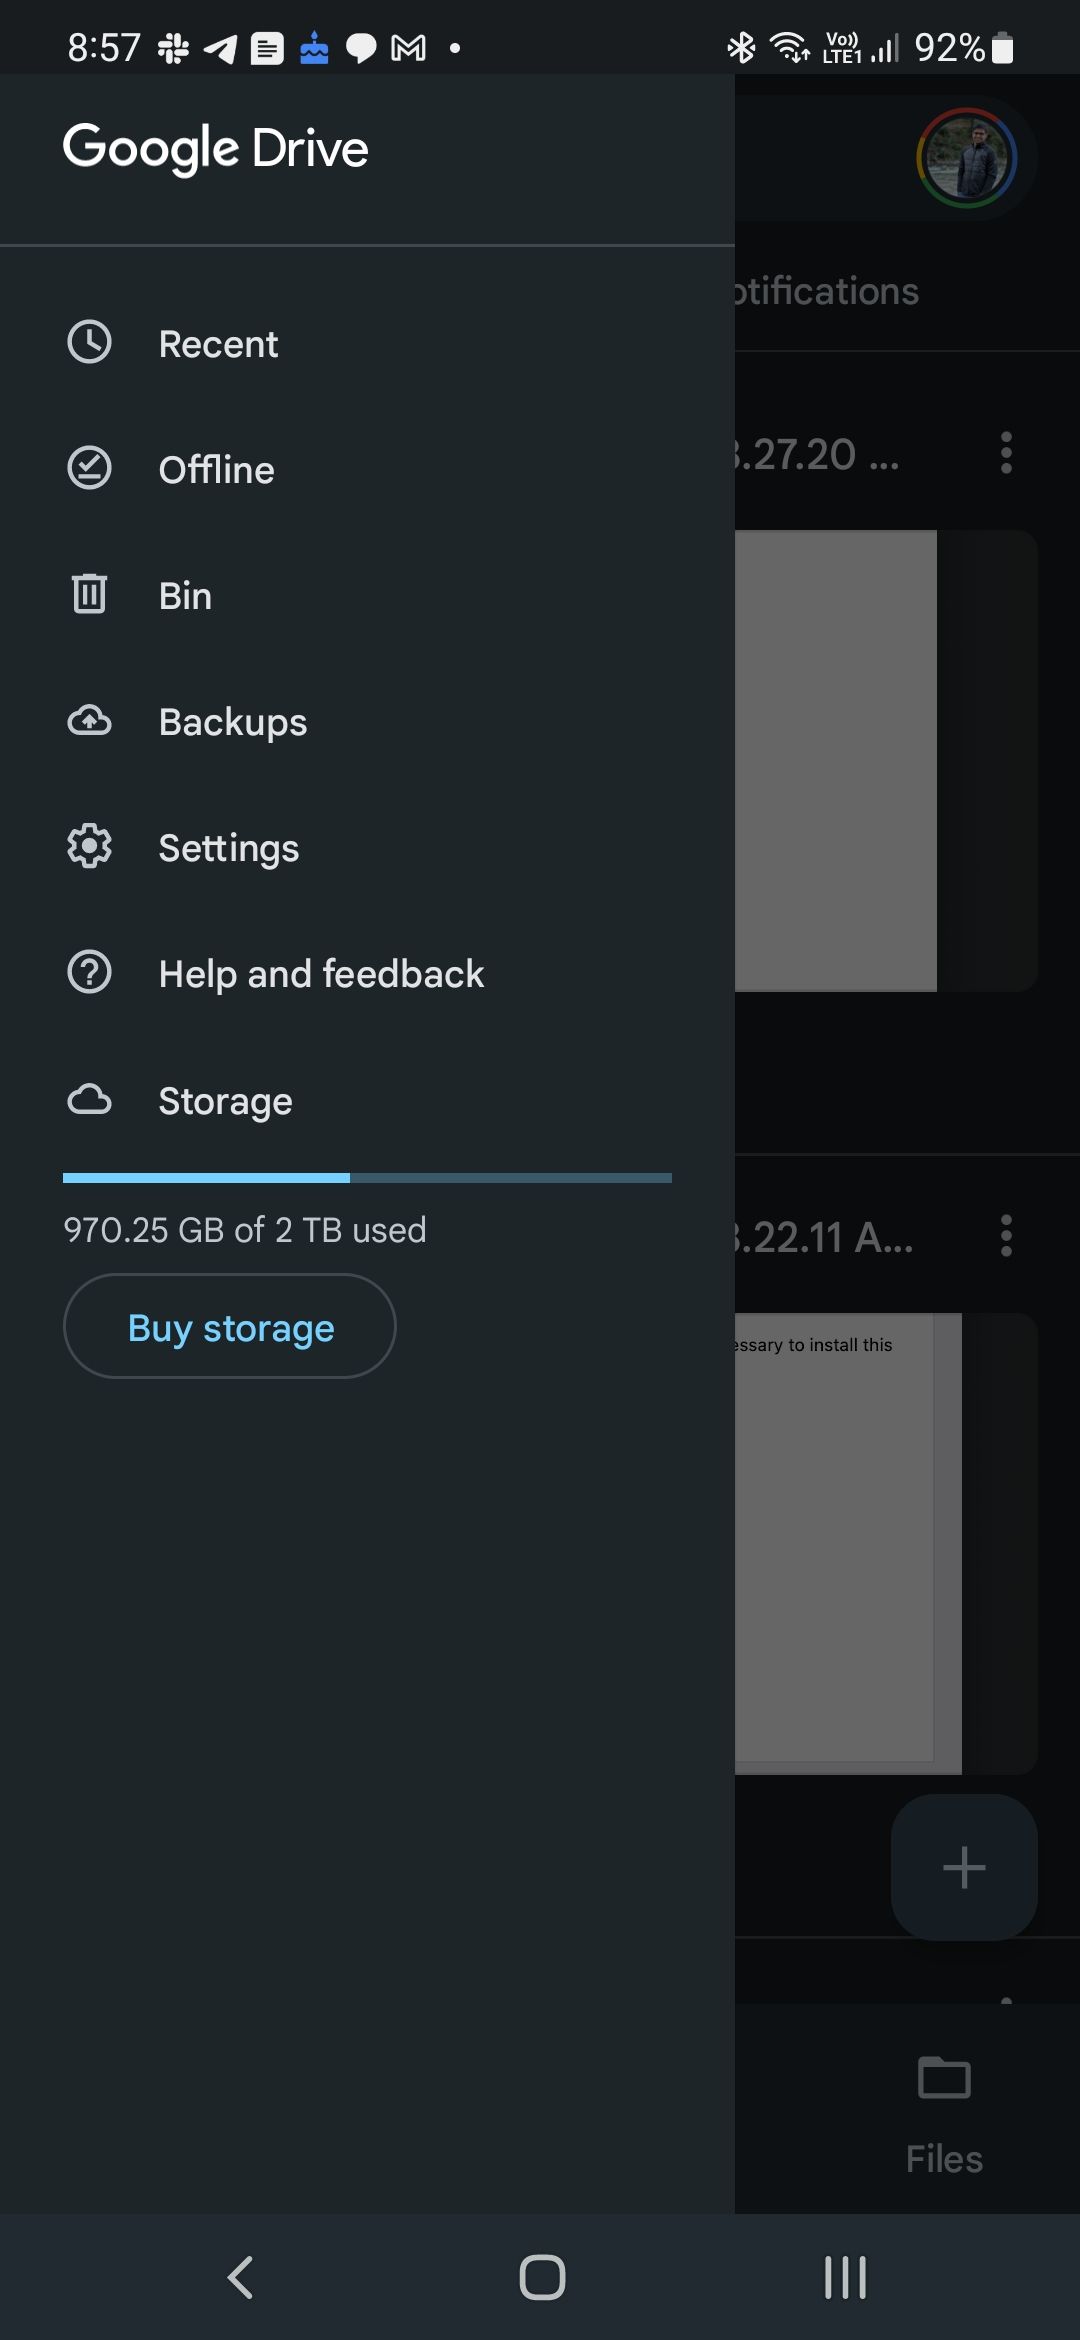 Screenshot showing the detailed layout of the Google Drive sidebar, including icons and labels for 'Recent, 'Offline', 'Backups', 'Settings', 'Help and feedback', 'Storage', and 'Bin'. 